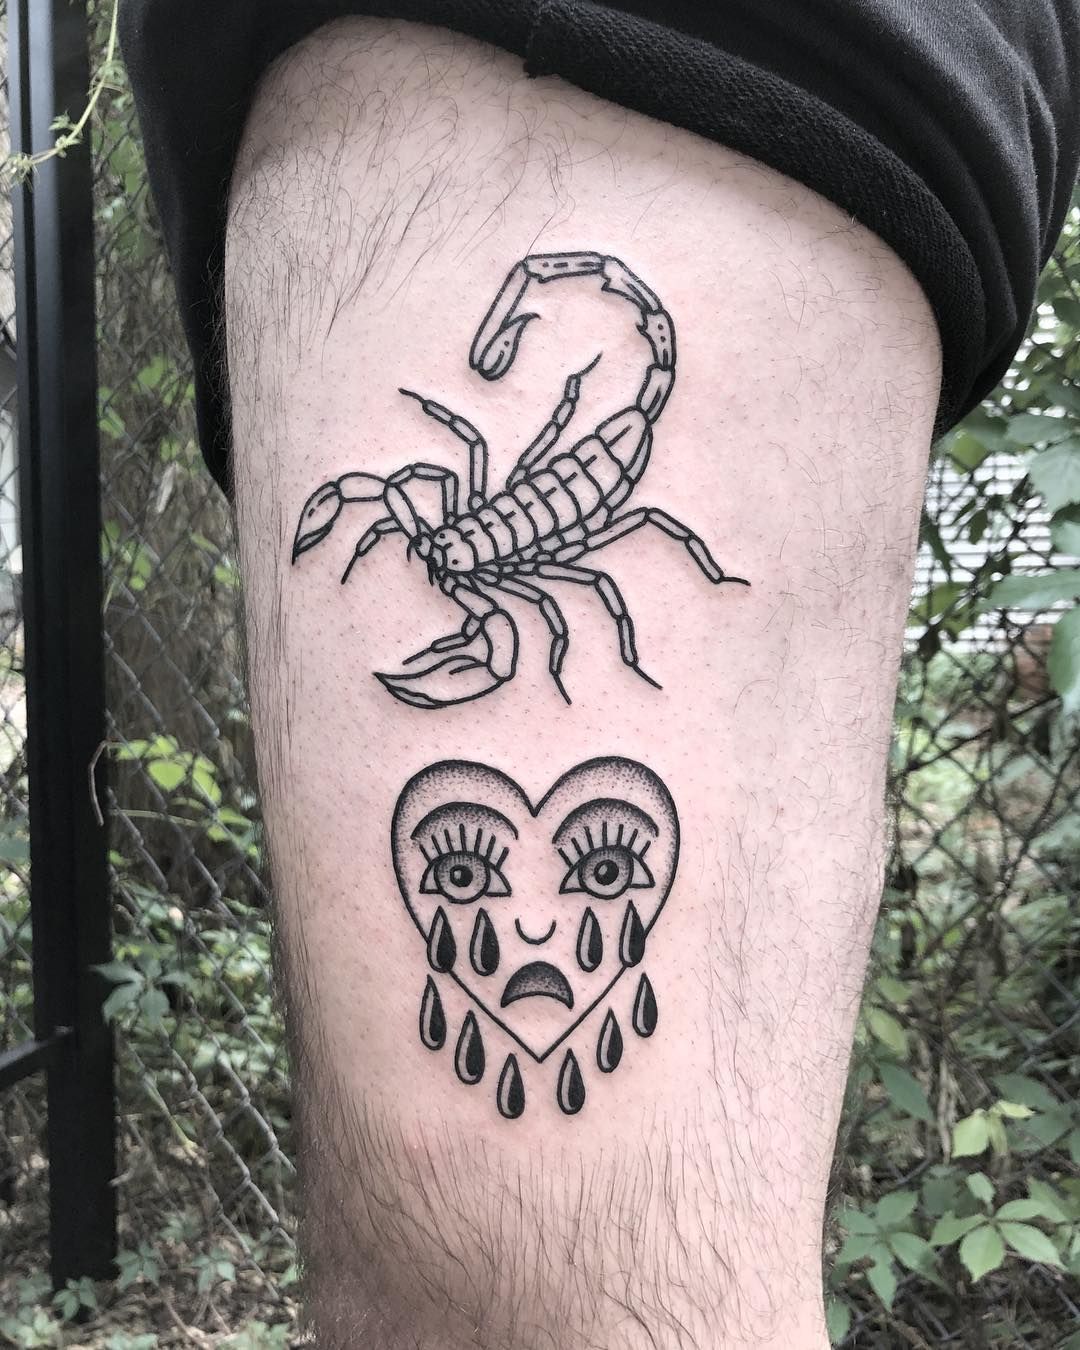 Ideas for Scorpio tattoos you could put on your body